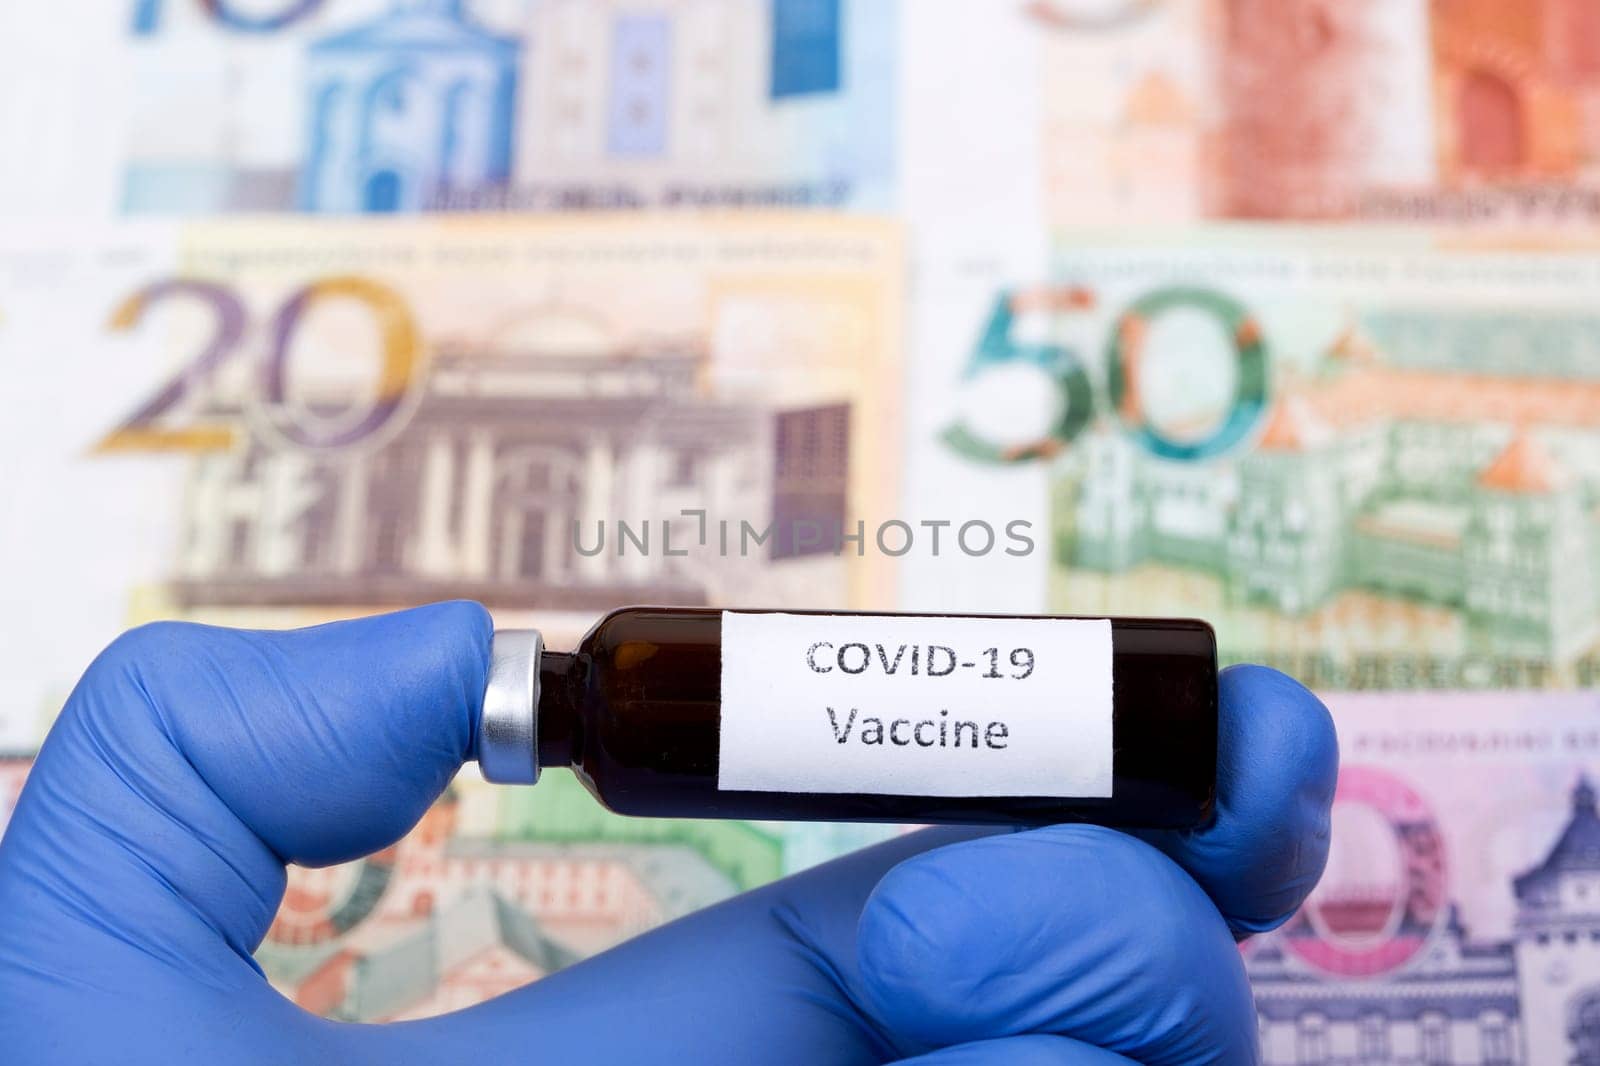 Vaccine against Covid-19 on the background of Belarusian money